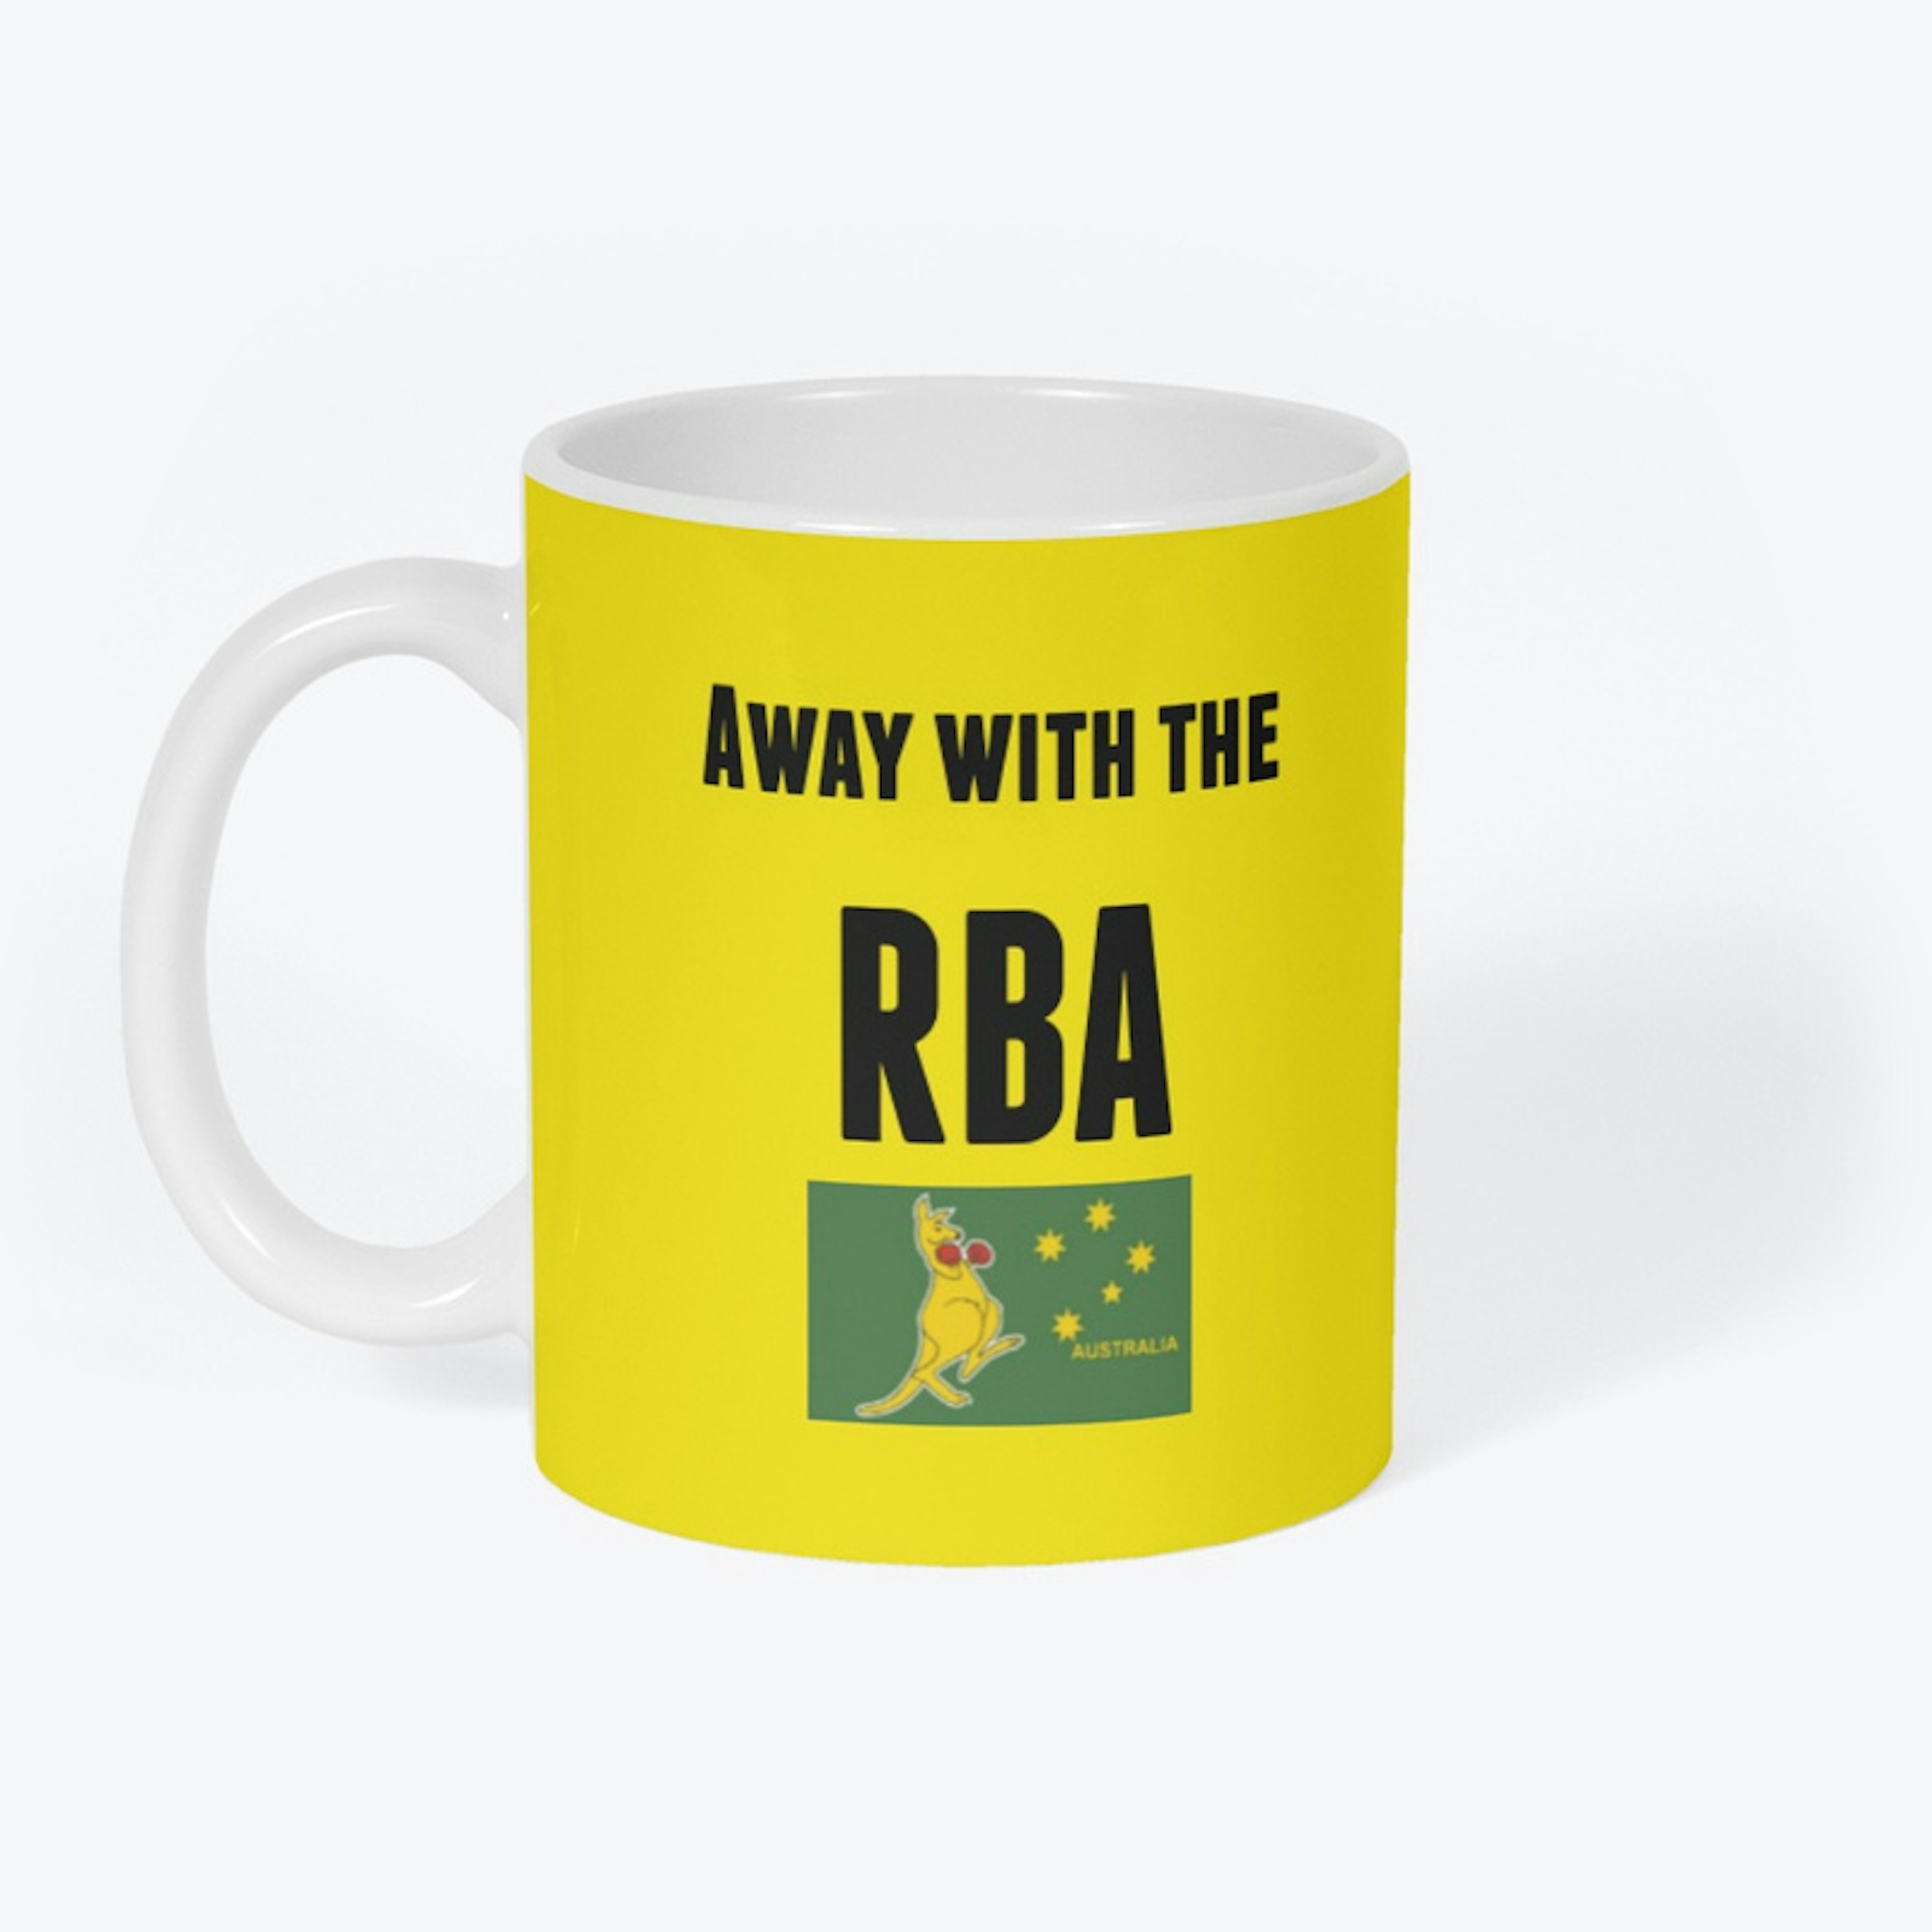 Away with the RBA.